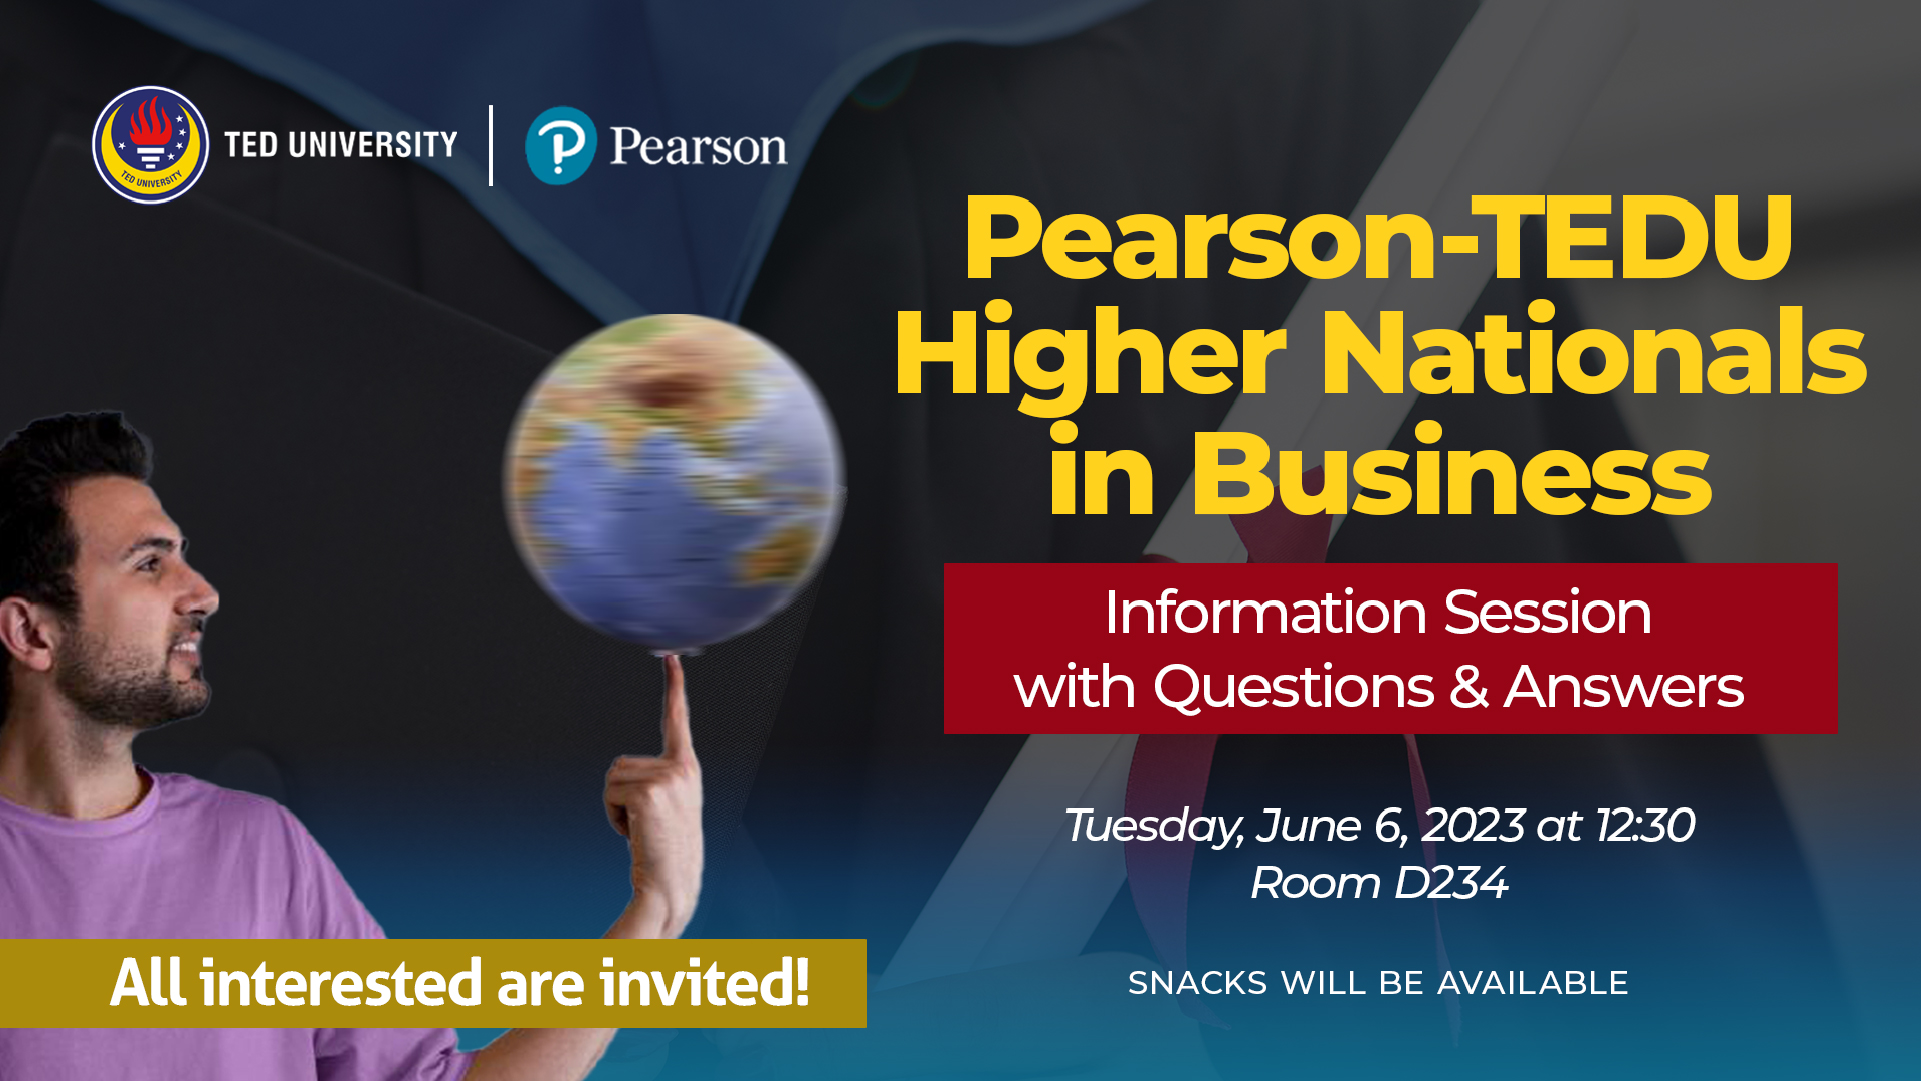 Pearson-TEDU Higher Nationals in Business Information Session with Questions & Answers 